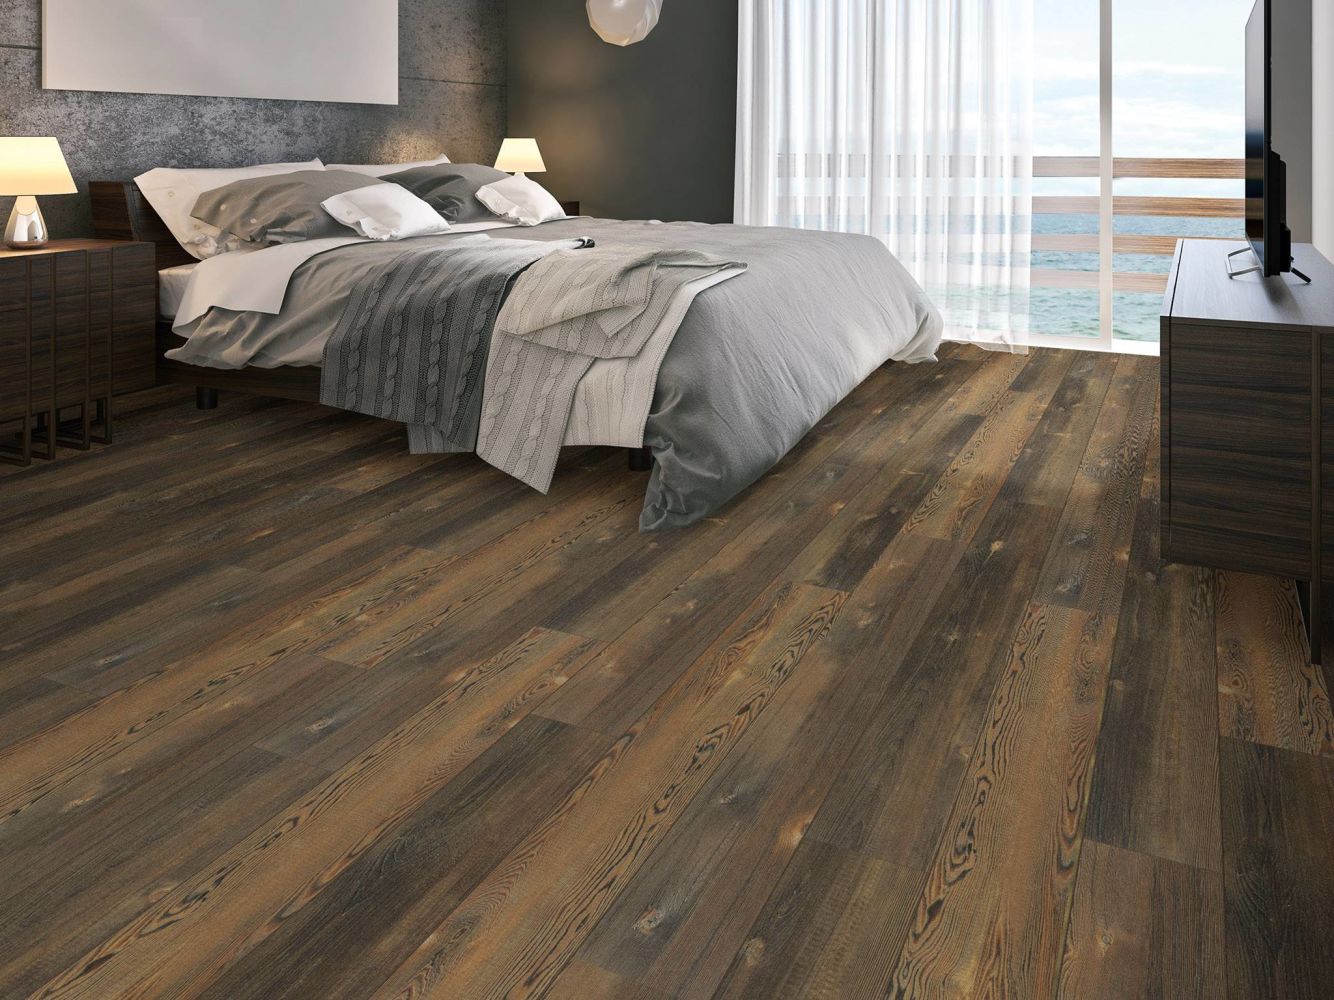 Shaw Floors Cp Colortile Rigid Core Plank And Tile Mission Pine Clk Forest Pine 00812_CV169